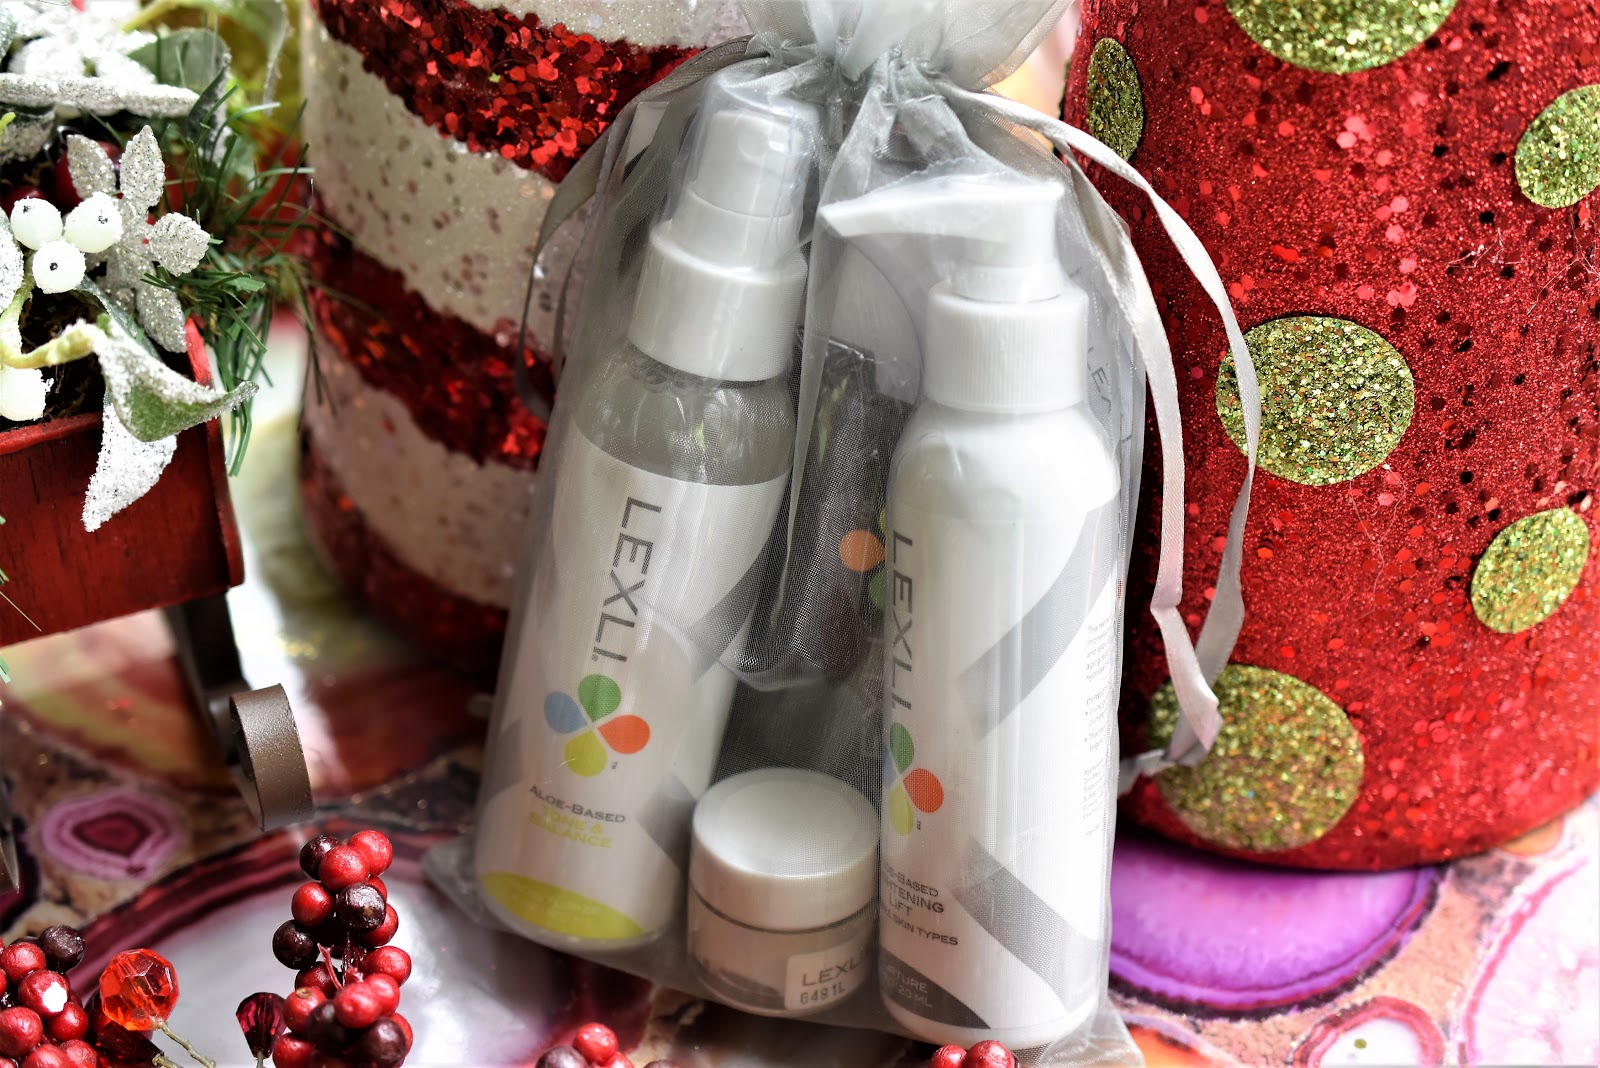 Giveaway: Keep Your Skin Looking Flawless and Rejuvenated with Lexli's Holiday Rescue Kit